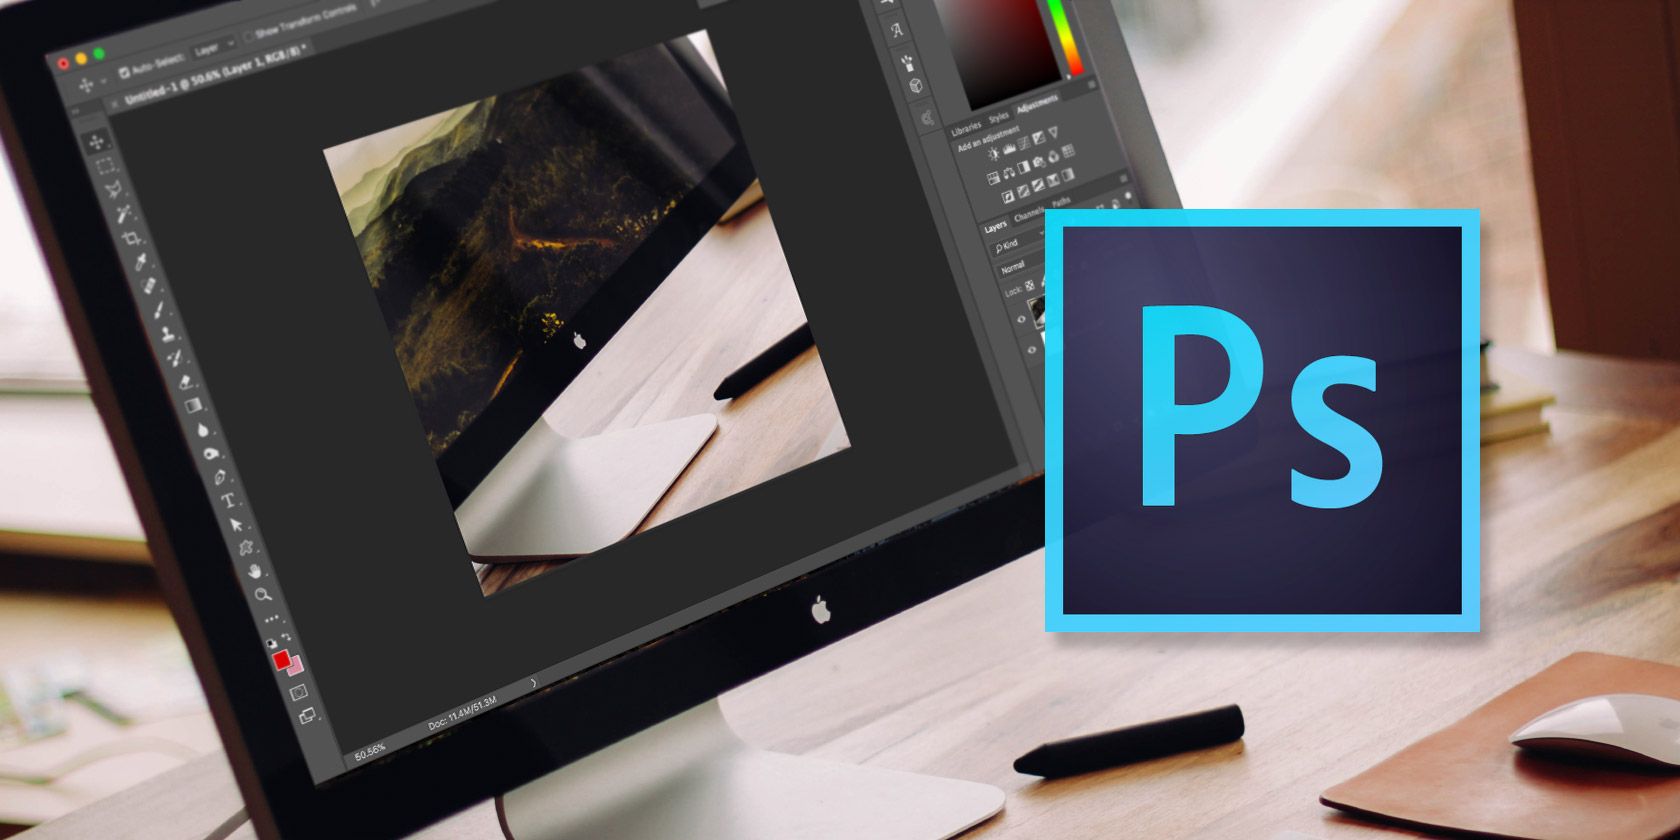 download adobe photoshop with creative cloud subscription